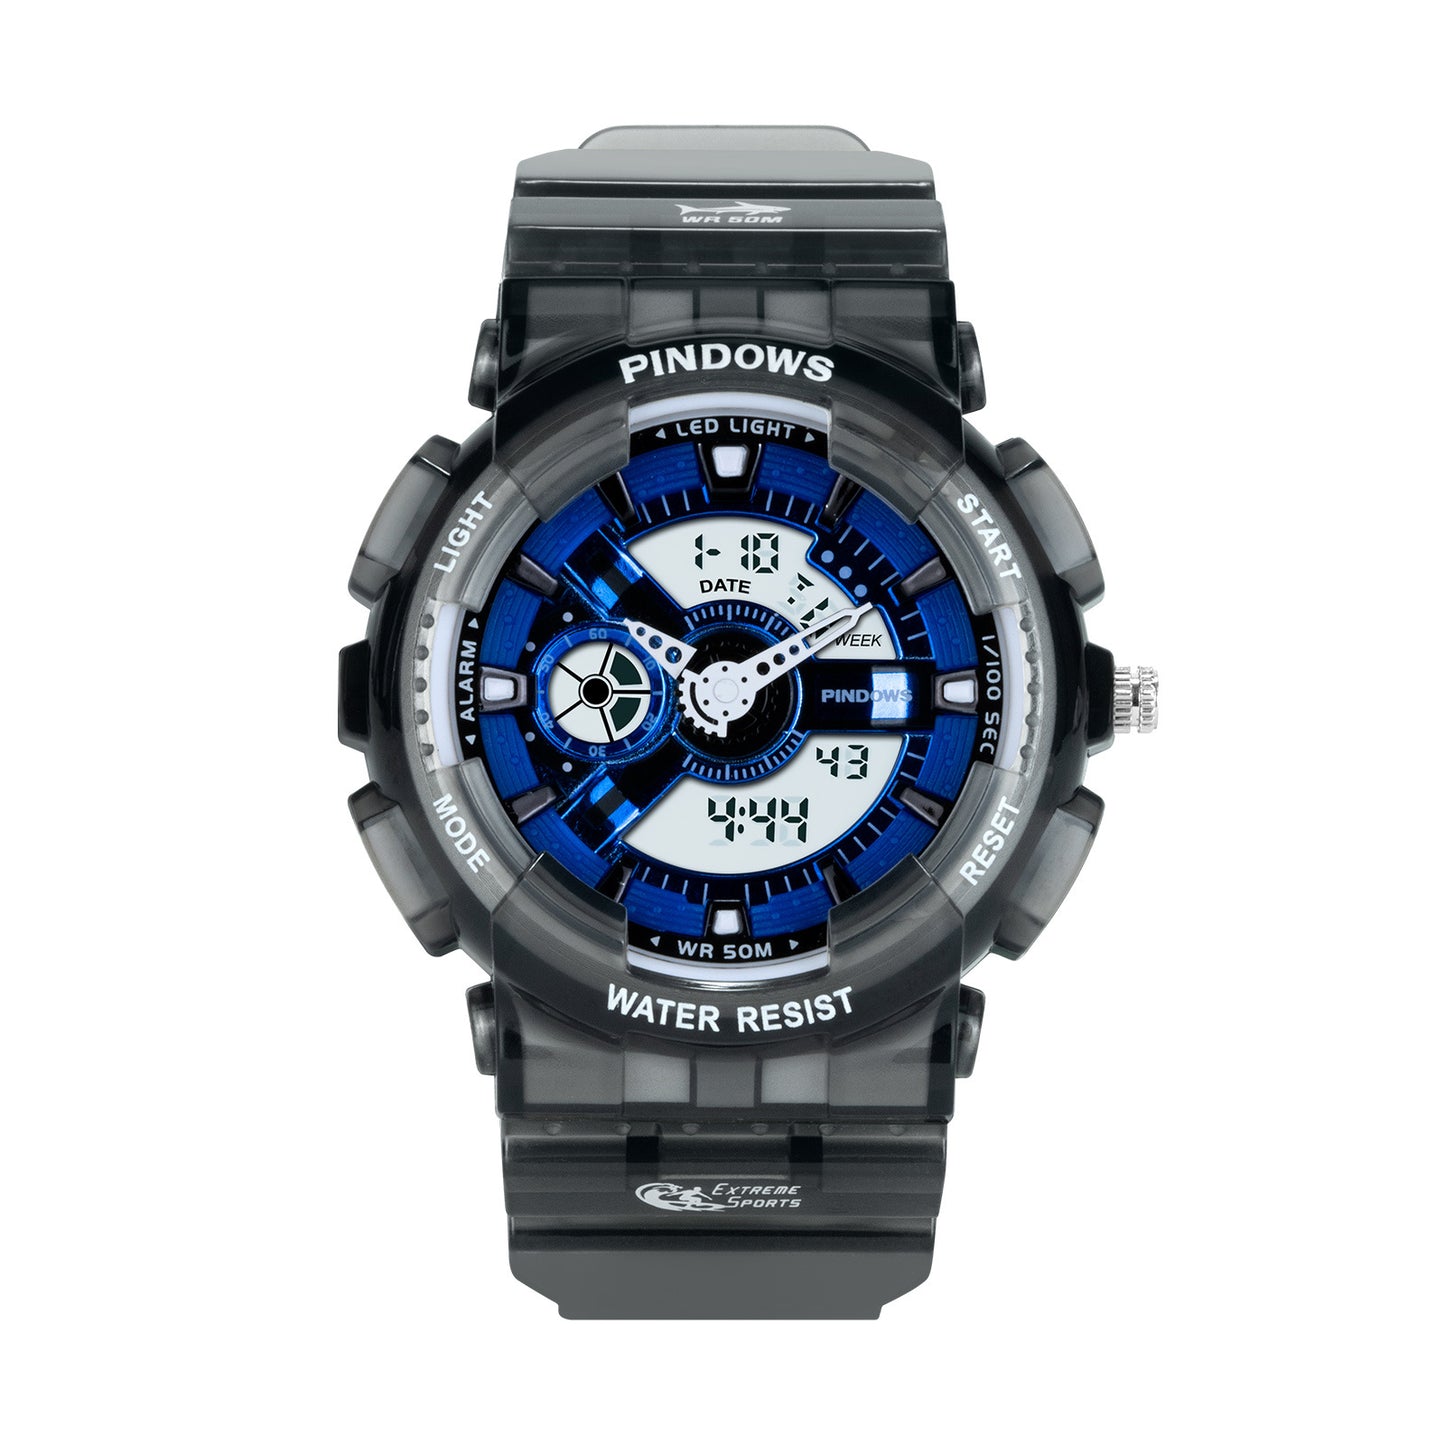 Boys' Outdoor Sports Electronic Watch